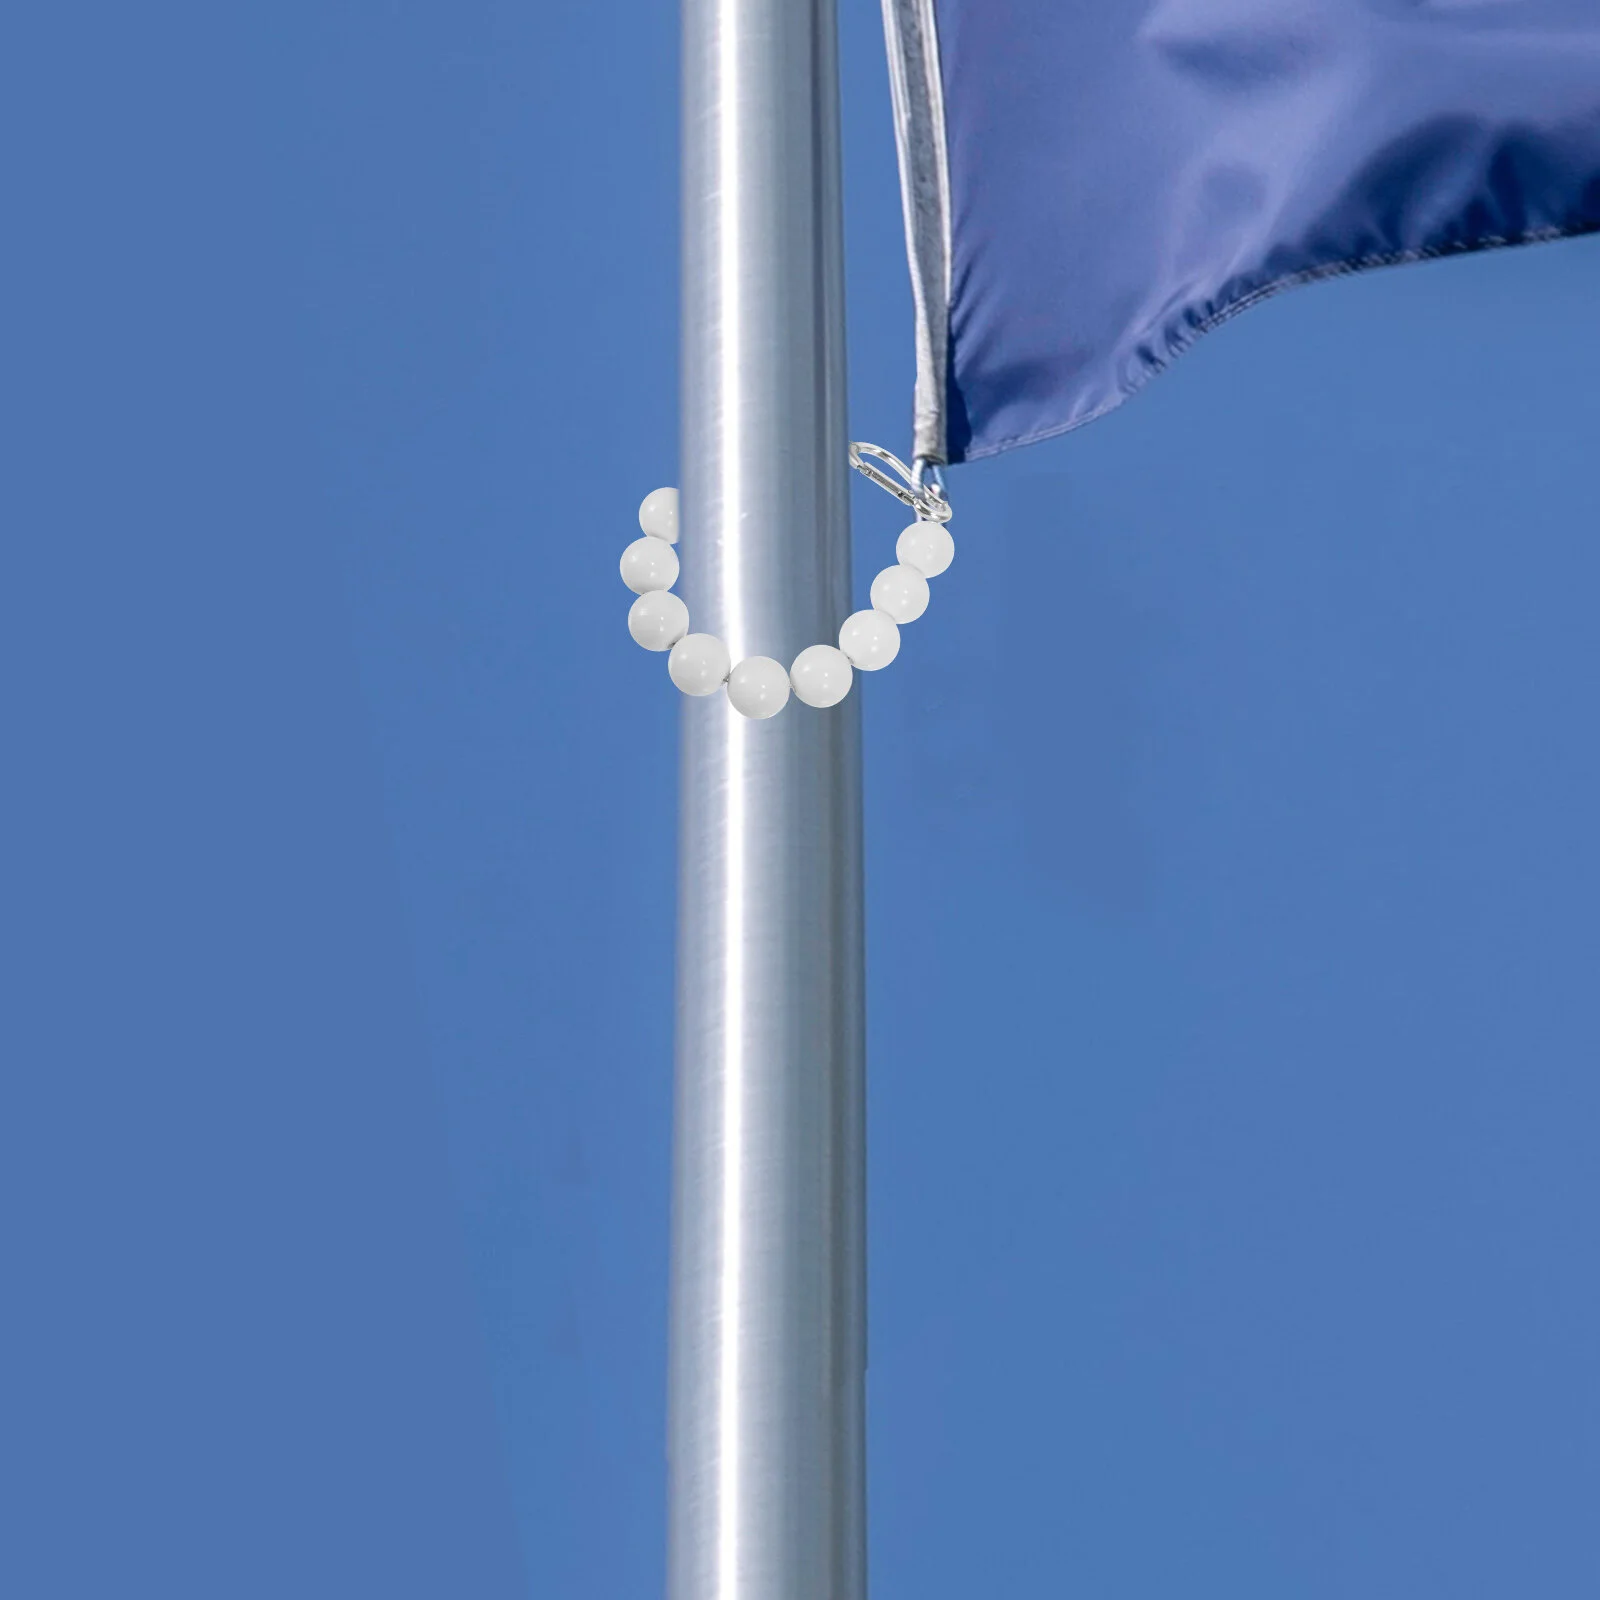 

Outdoor Flags Flagpole Retaining Ring Retainer Soft Rope 13x13cm White Acrylic Bead Beaded